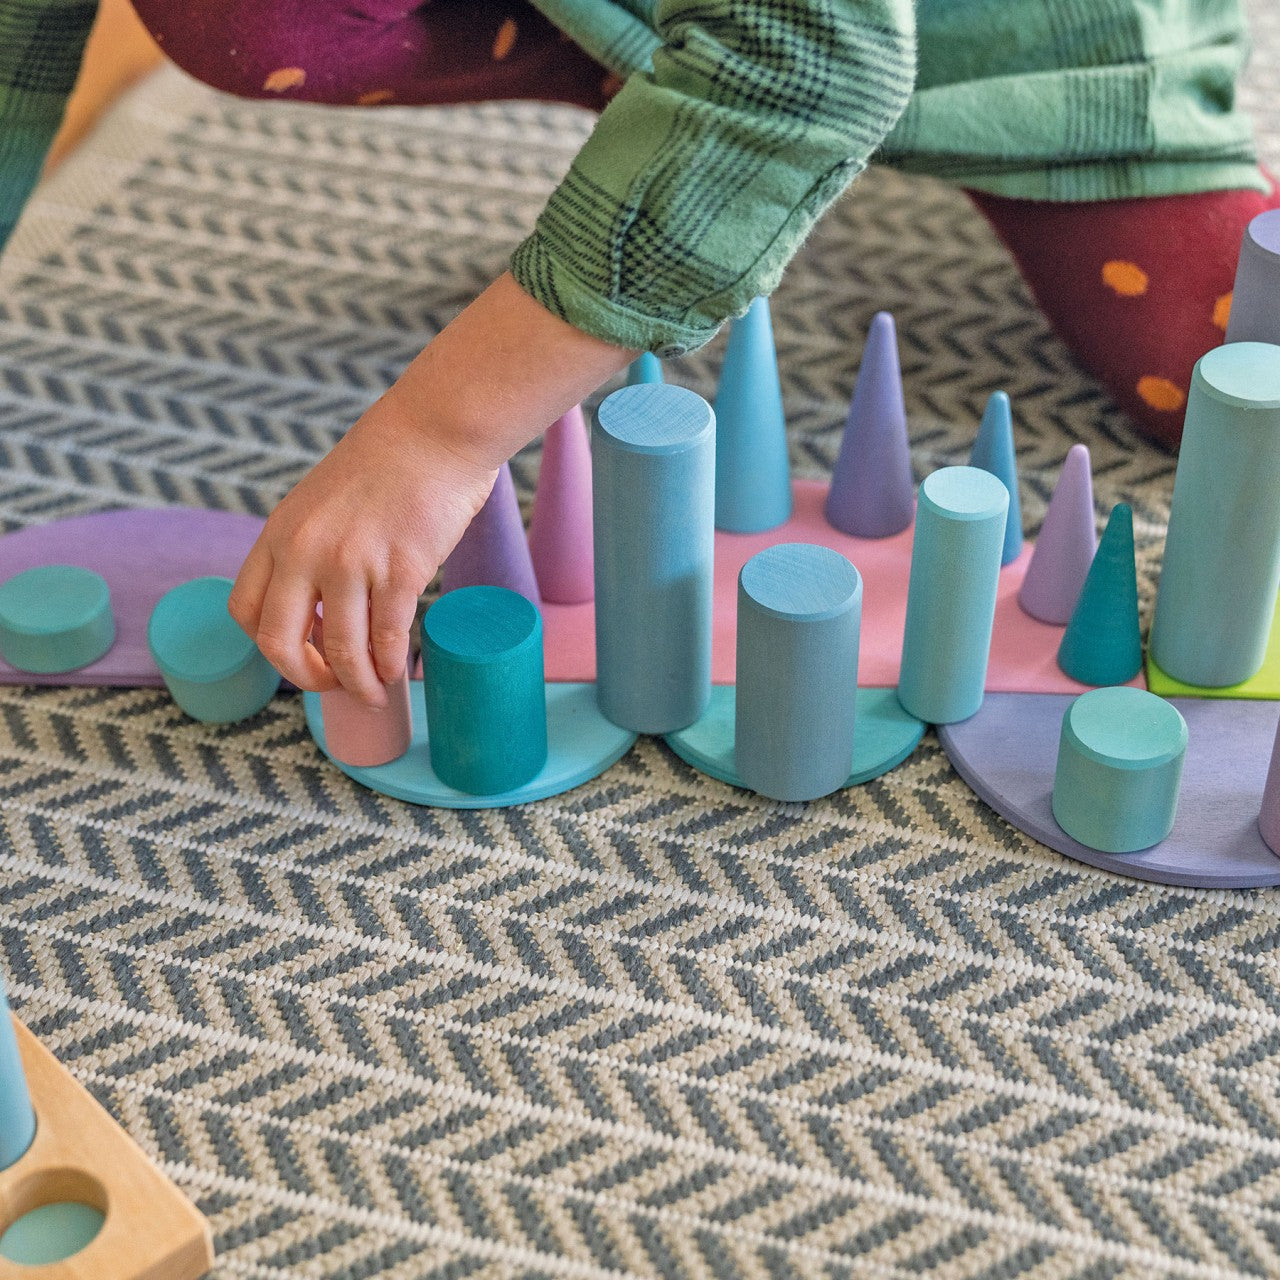 Pastel Semi Circles | 11 Pieces | Wooden Toys for Kids | Open-Ended Play